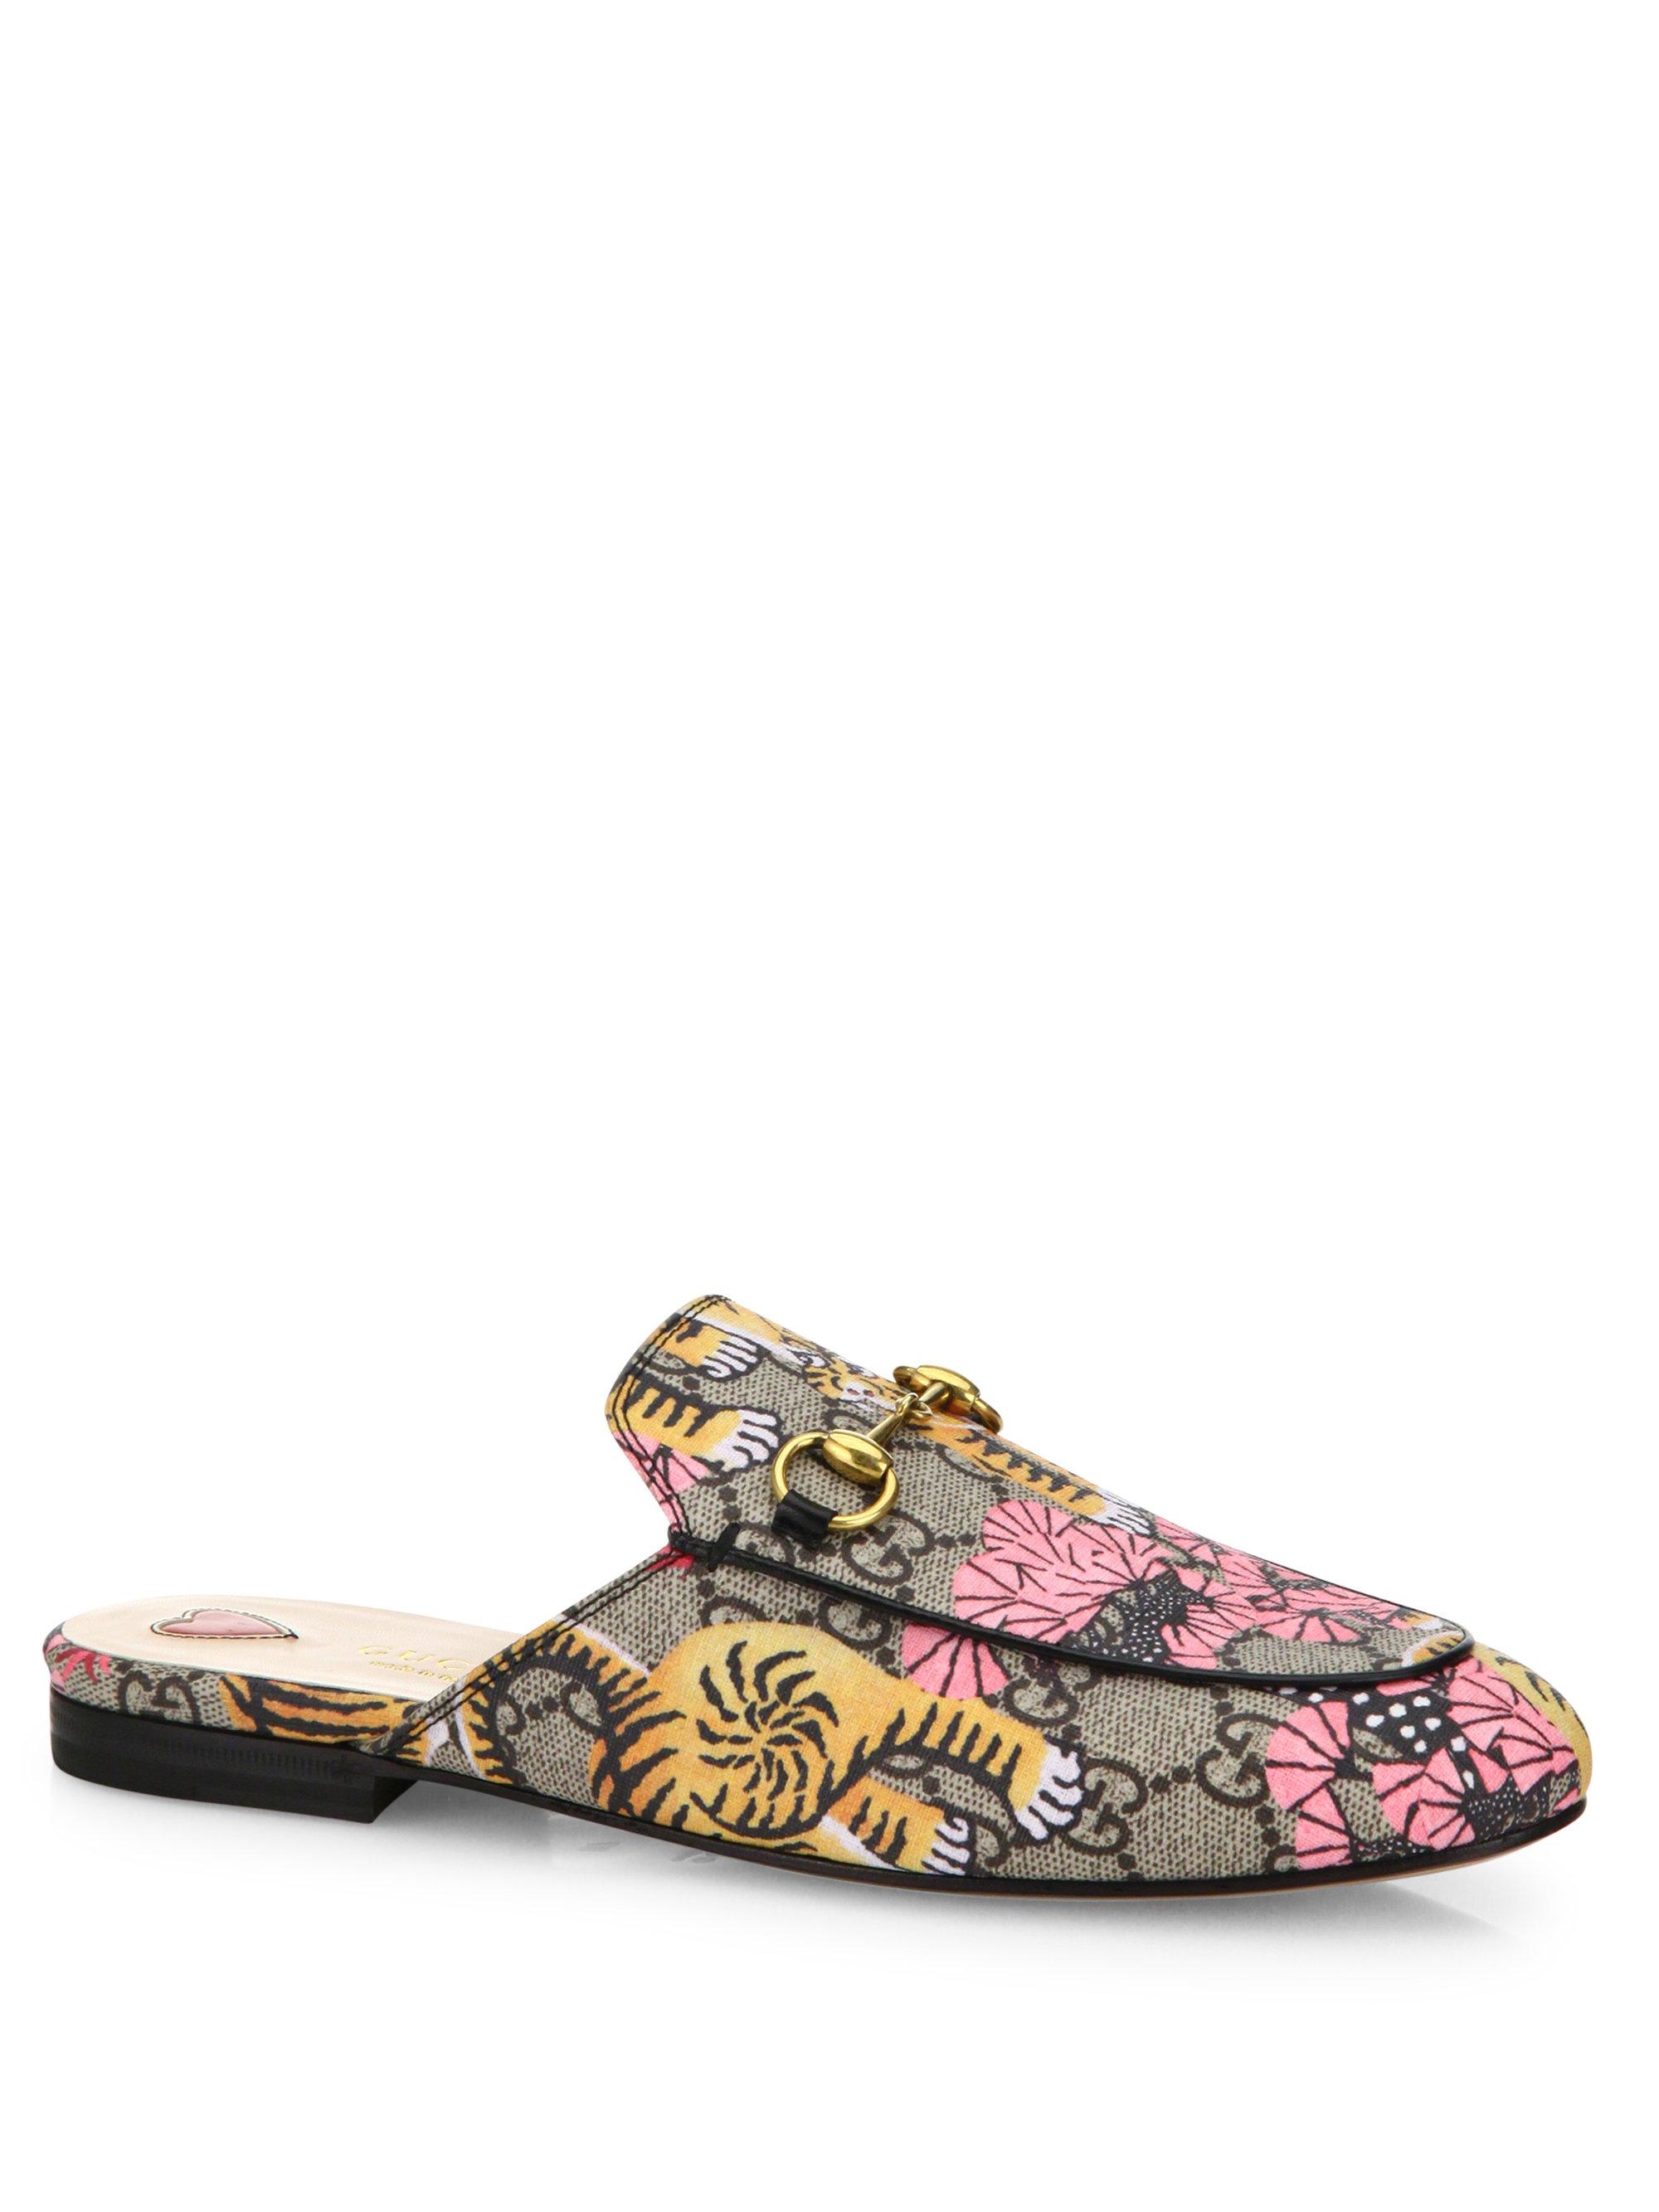 Gucci Begie Tiger Print GG Supreme Canvas Princetown Mules | Lyst